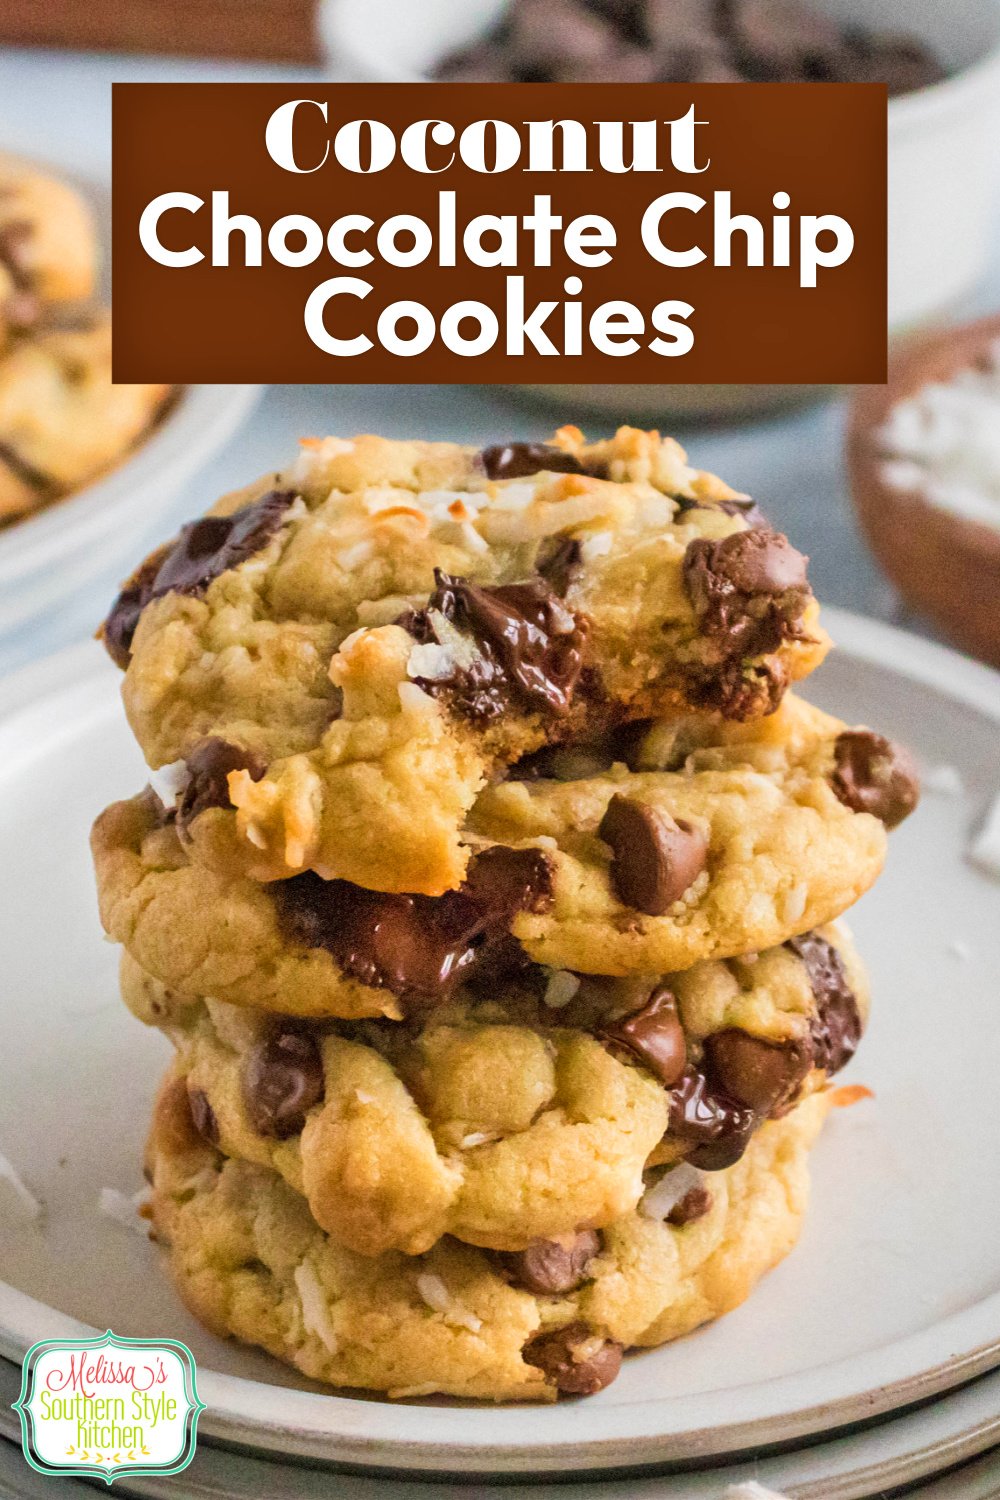 Bake a small batch of Coconut Chocolate Chip Cookies for dessert! #coconutcookies #chocolatechipscookies #coconutchocolatechipcookies #cookierecipes #holidaybaking #christmascookies via @melissasssk